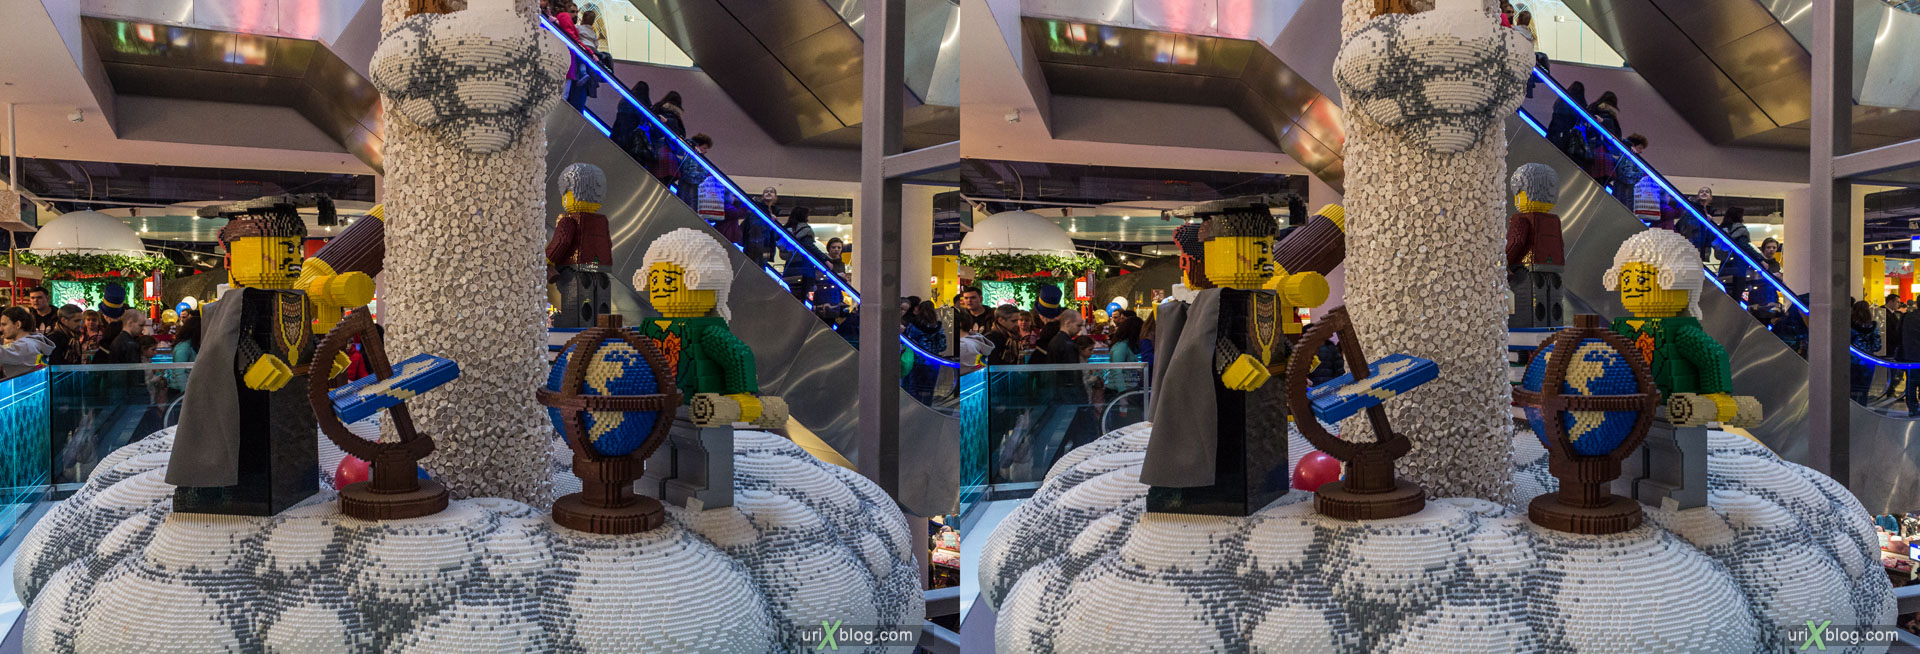 LEGO, Hamleys-World, Central Childrens World, Shop, Store, Lubyanskaya square, Moscow, Russia, 3D, stereo pair, cross-eyed, crossview, cross view stereo pair, stereoscopic, 2015